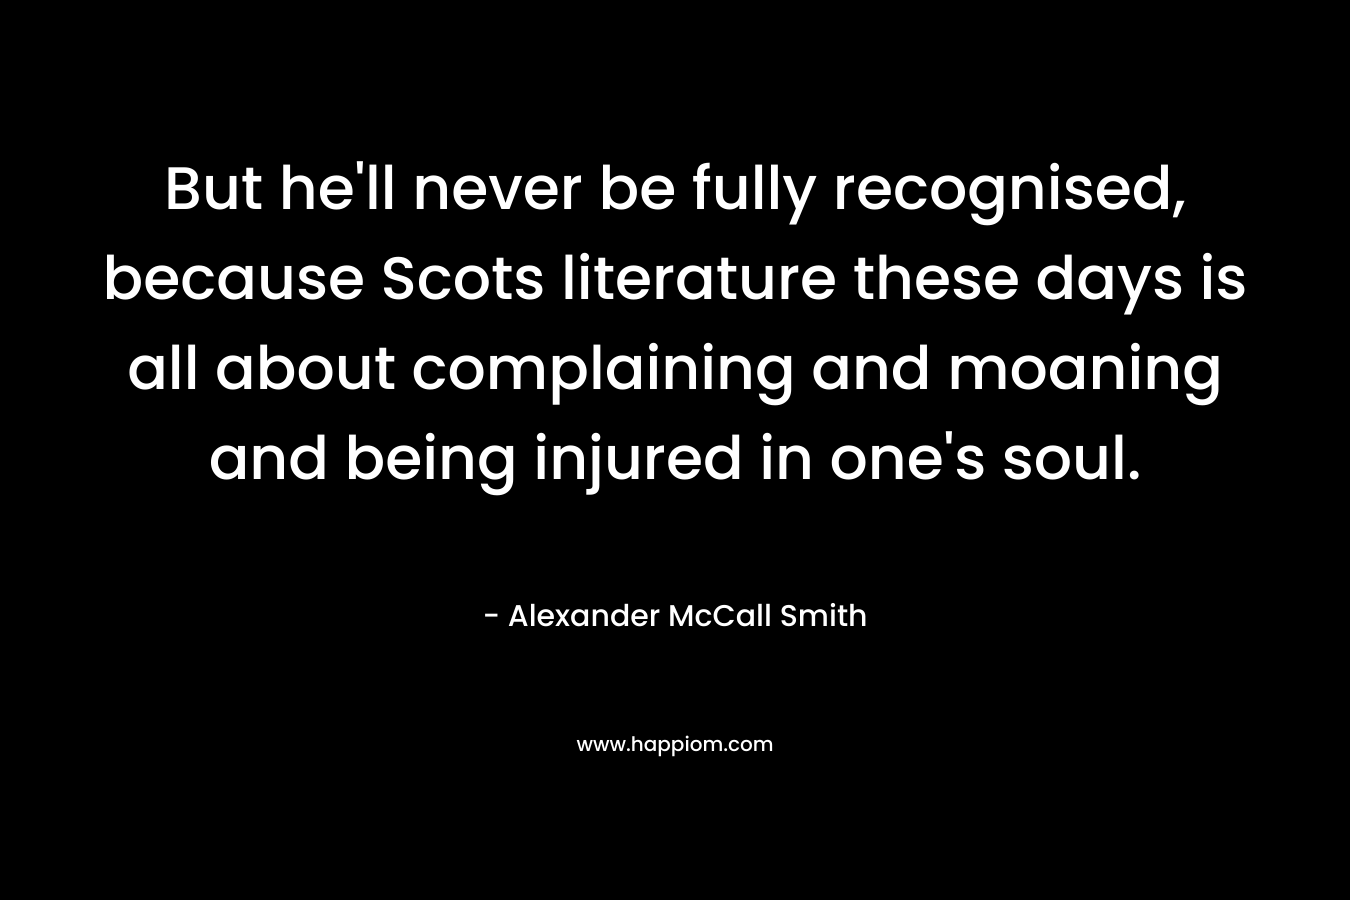 But he'll never be fully recognised, because Scots literature these days is all about complaining and moaning and being injured in one's soul.